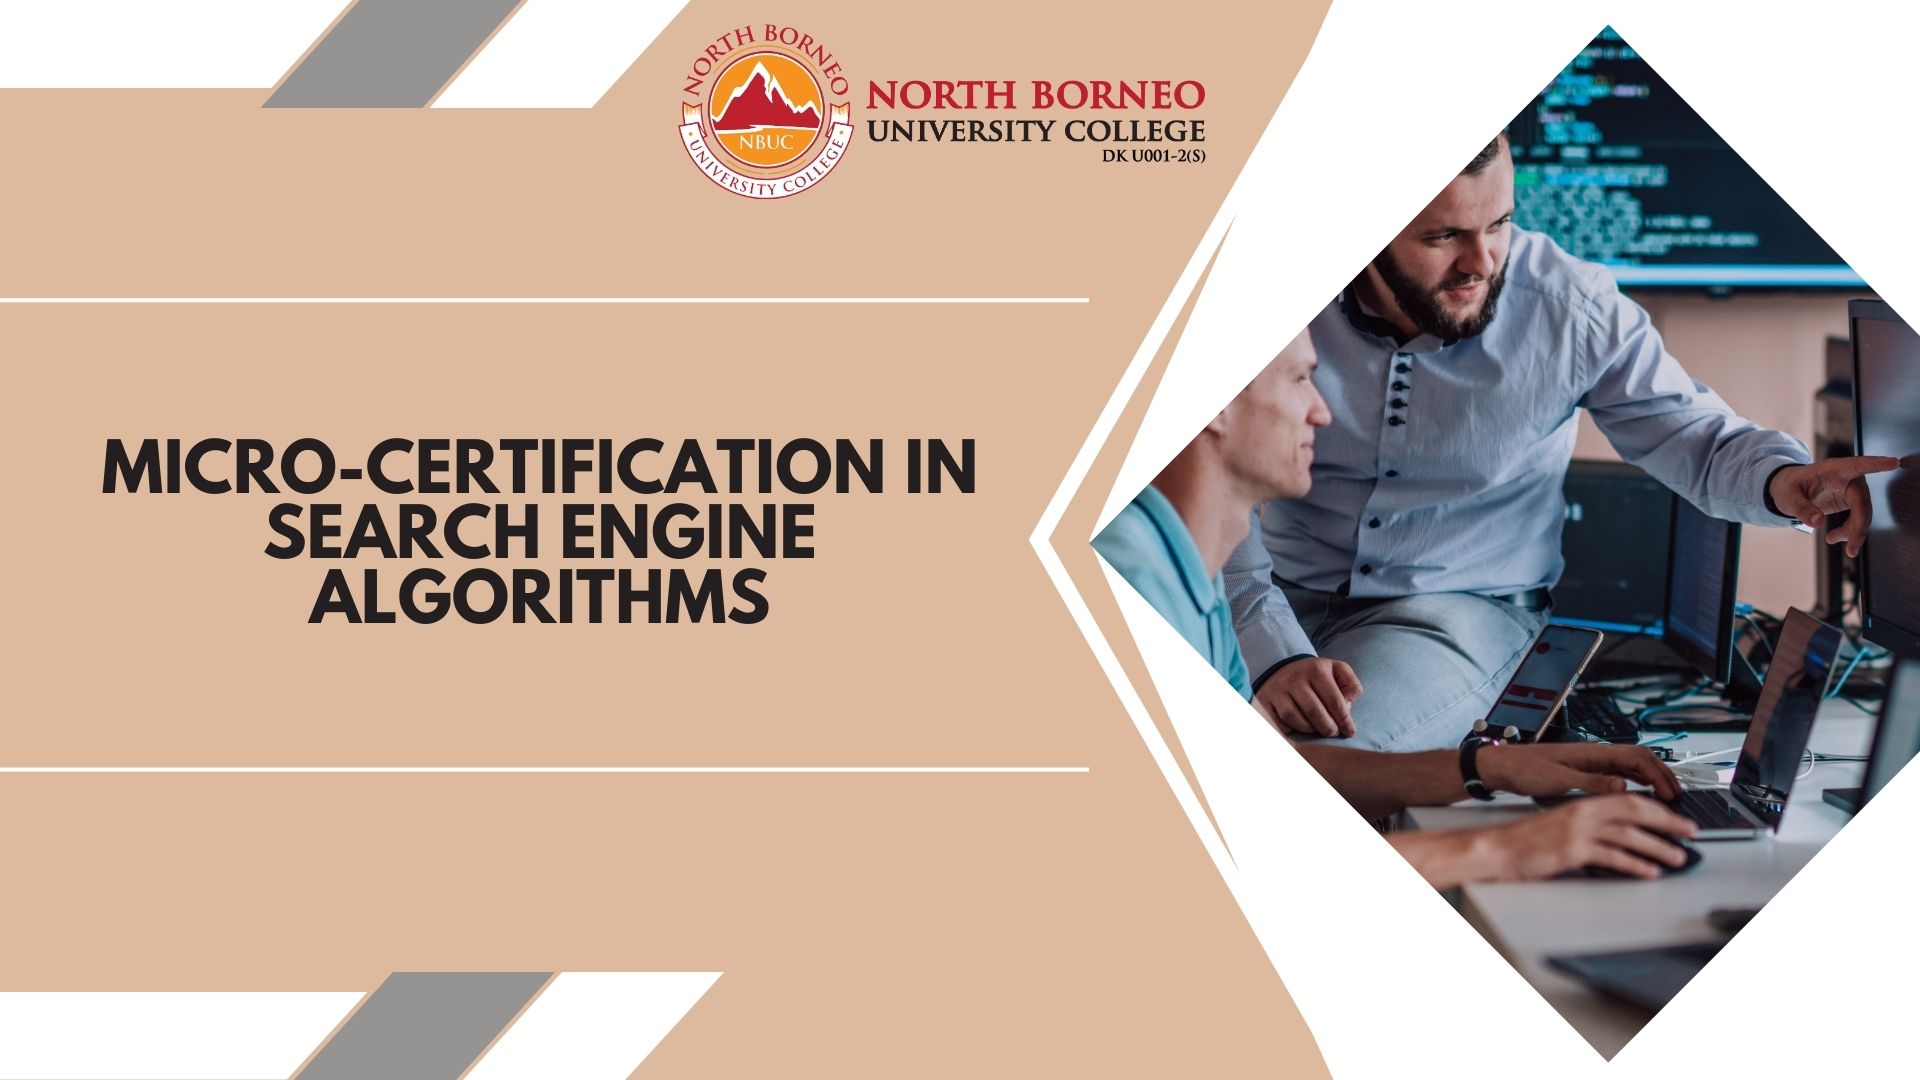 MICRO-CERTIFICATION IN SEARCH ENGINE ALGORITHMS